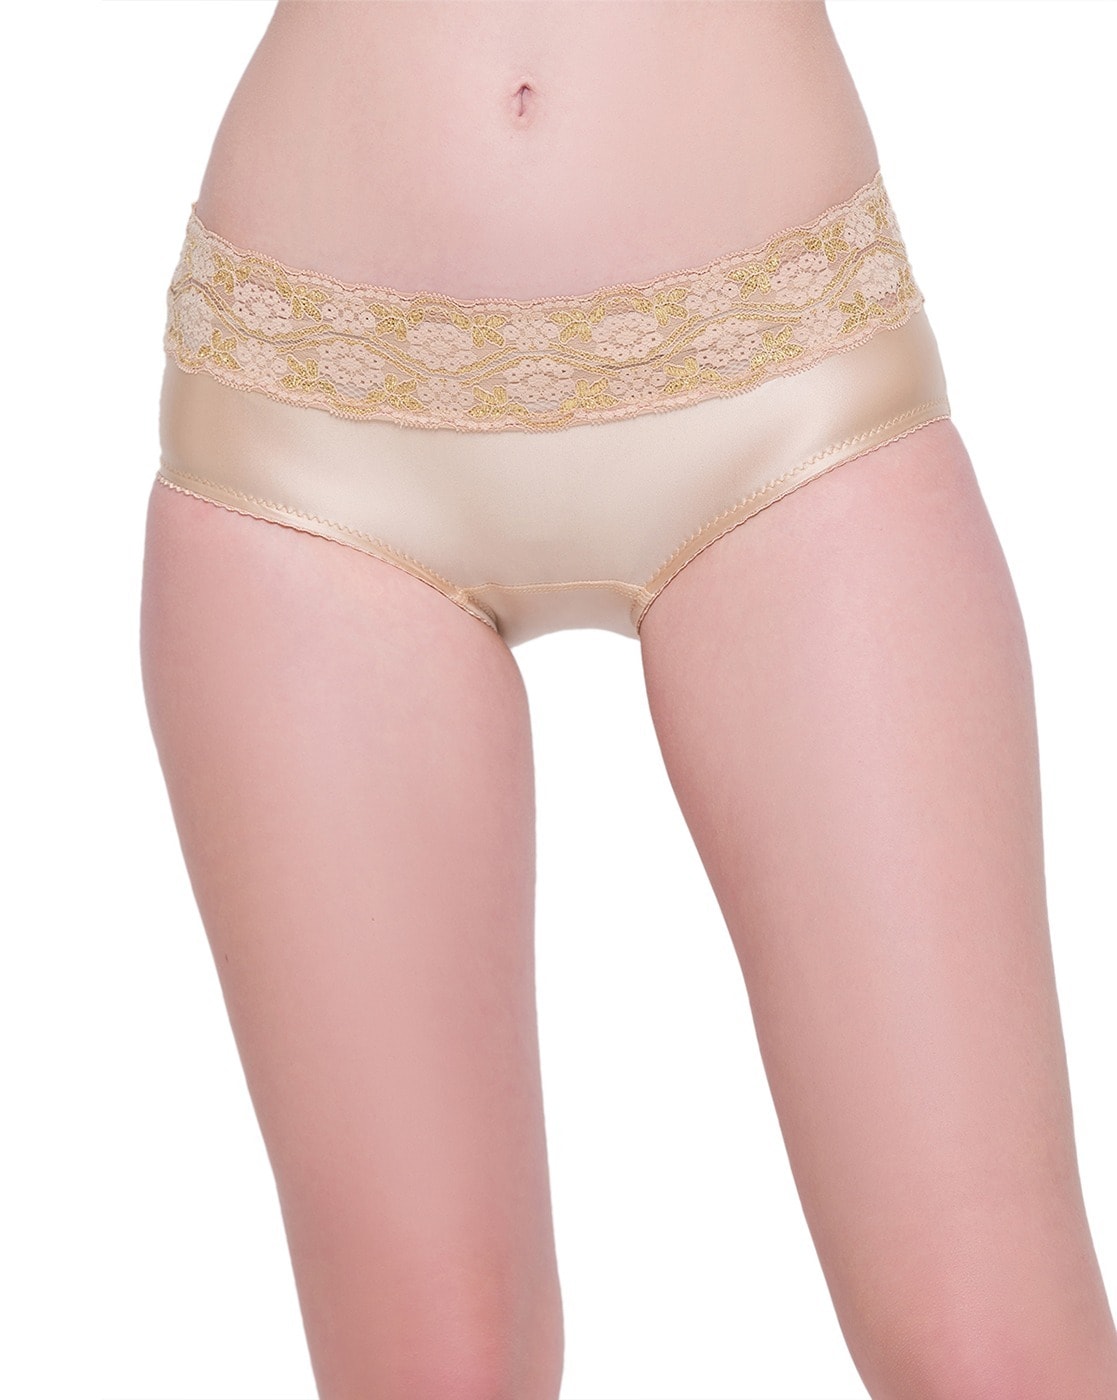 Buy Nude Panties for Women by Candyskin Online